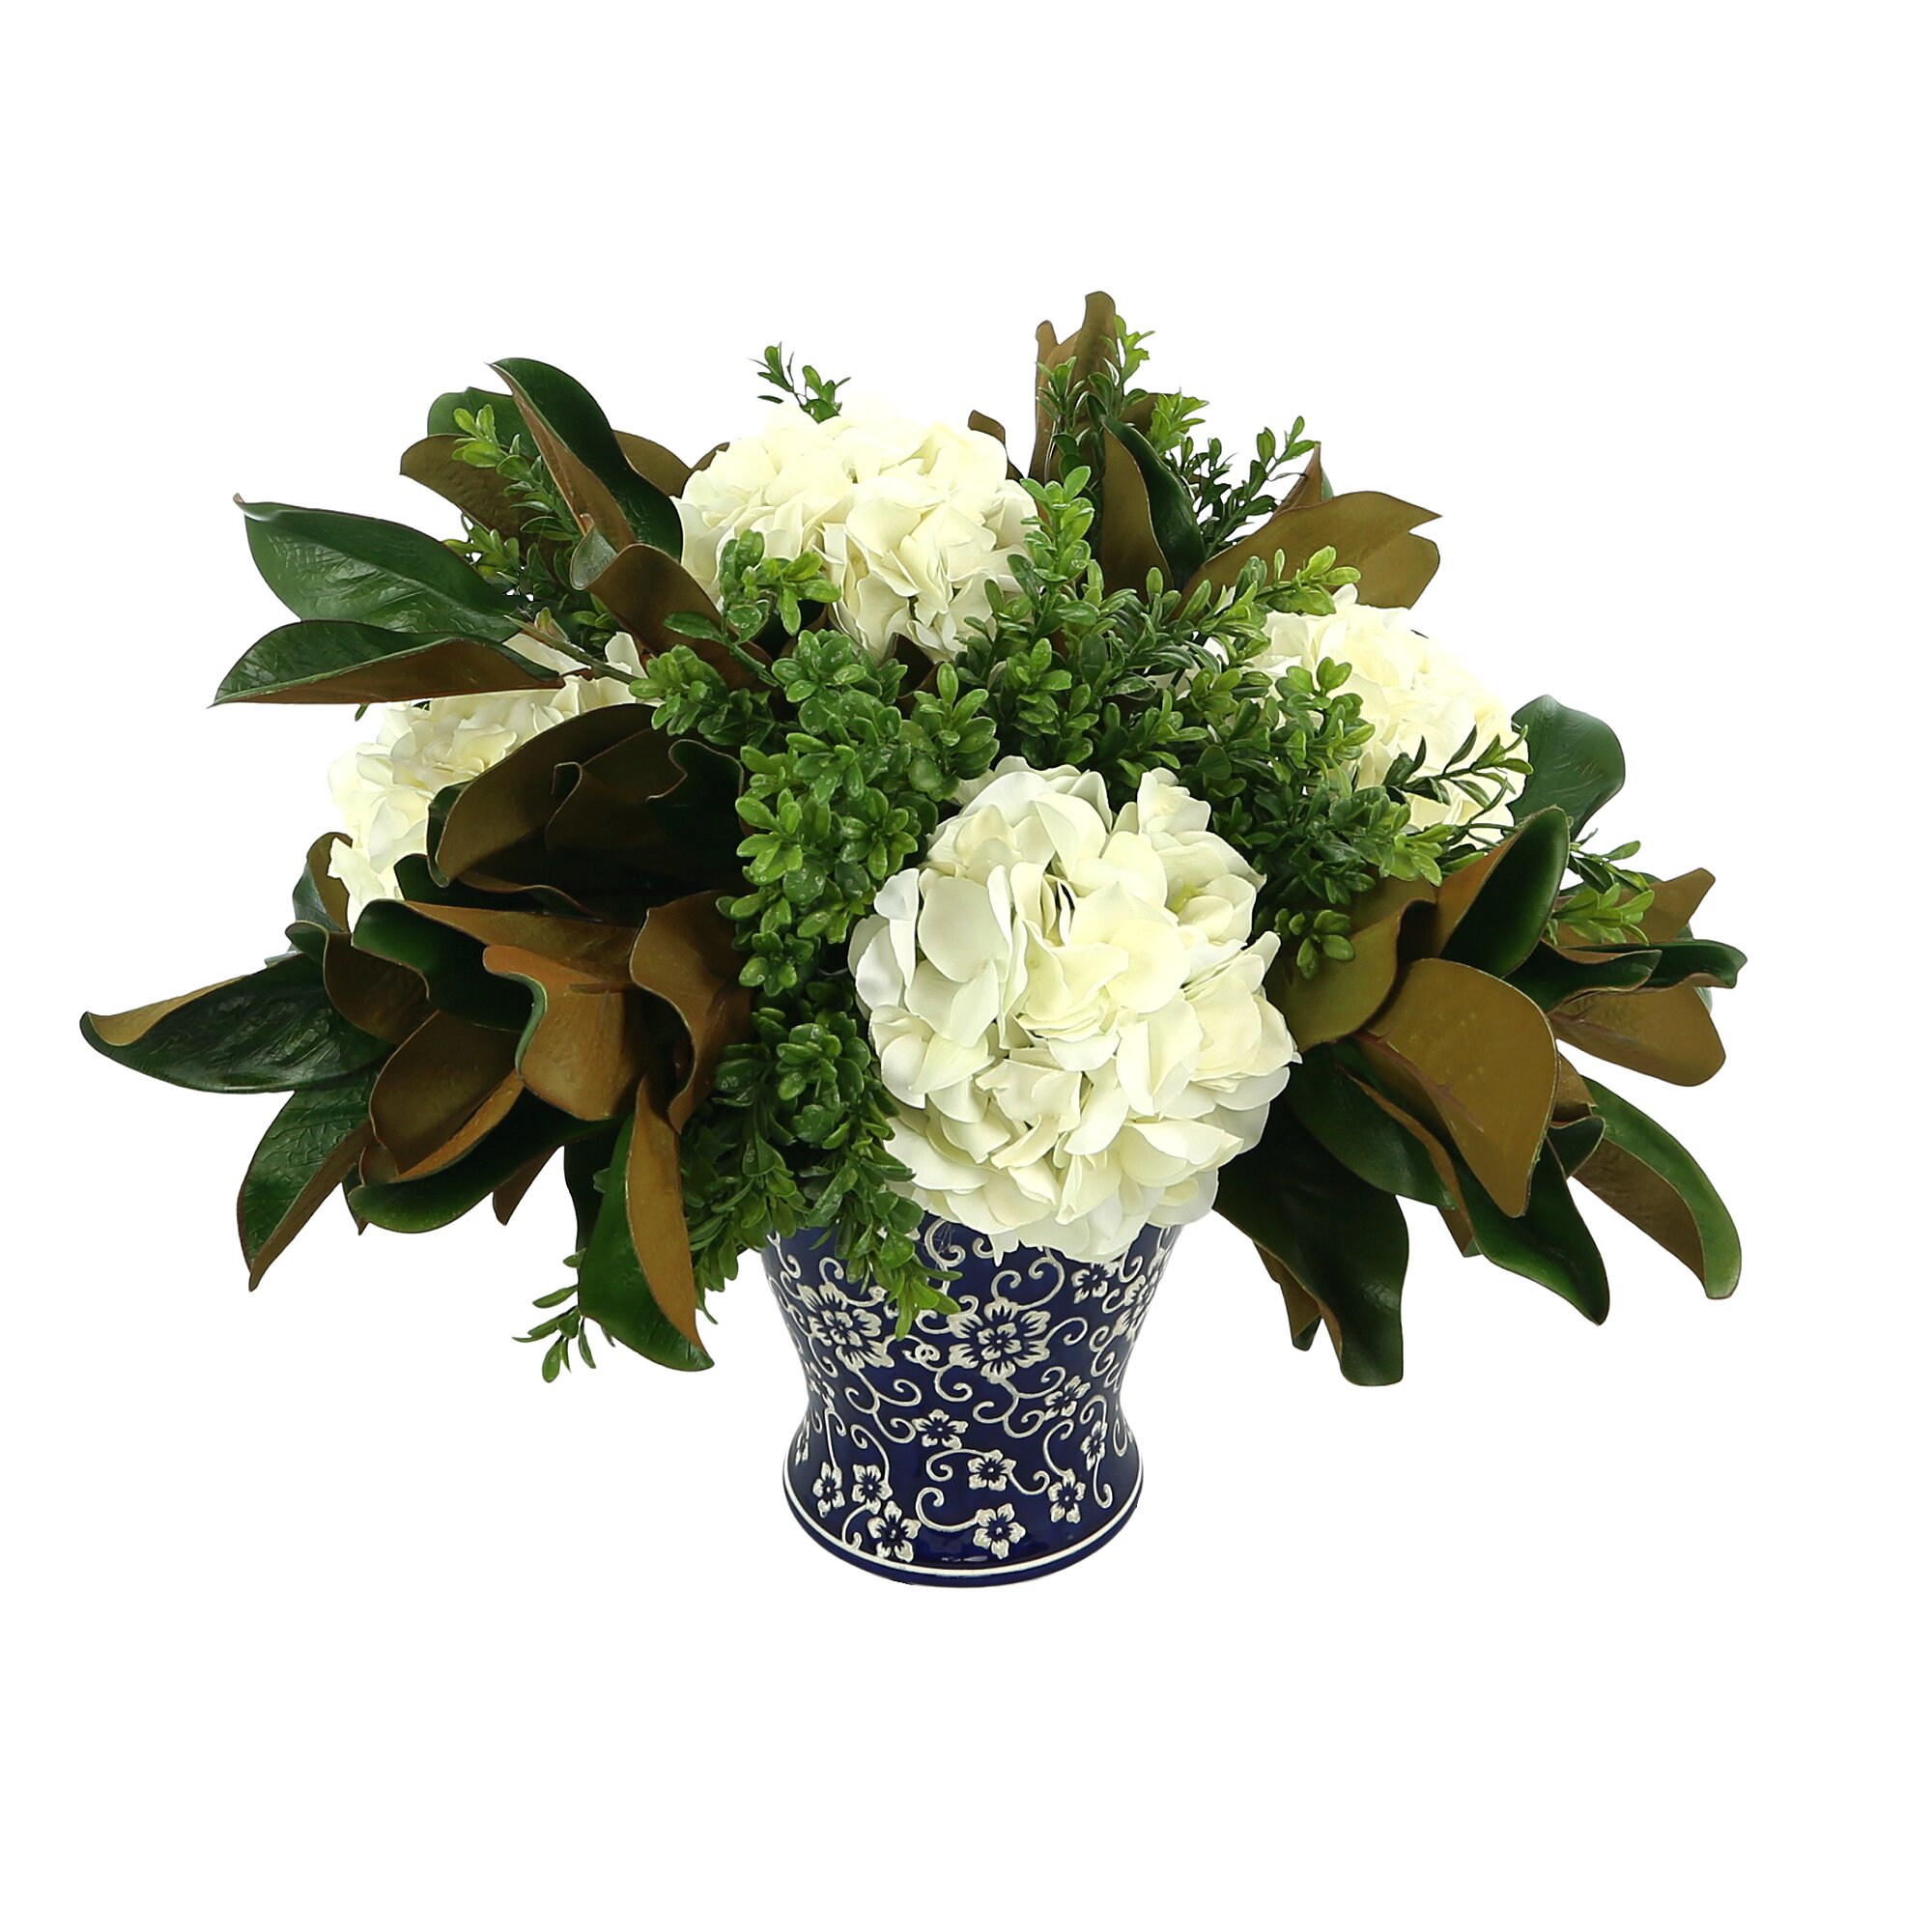 Image of Boxwood and Hydrangea in a Vase